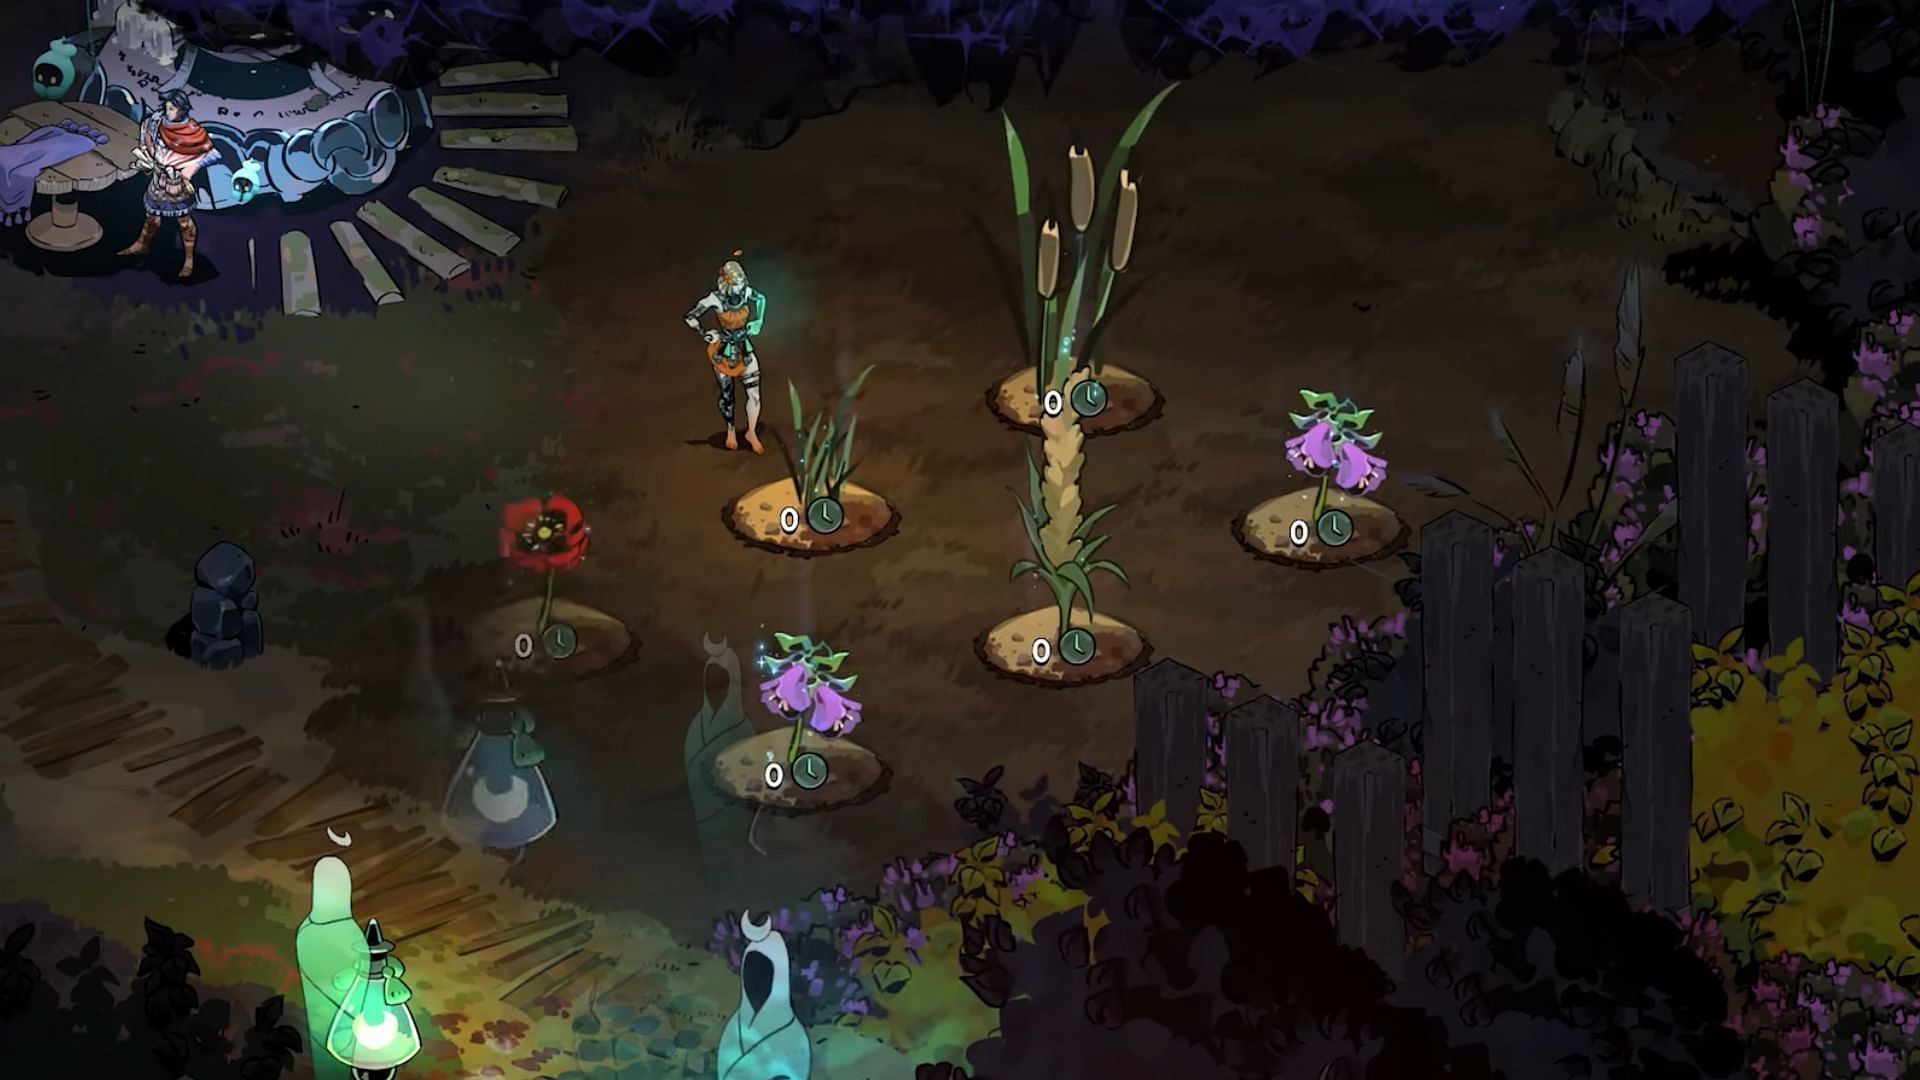 Silver Spade used to cultivate seeds in Hades 2 (Image via Supergiant Games)